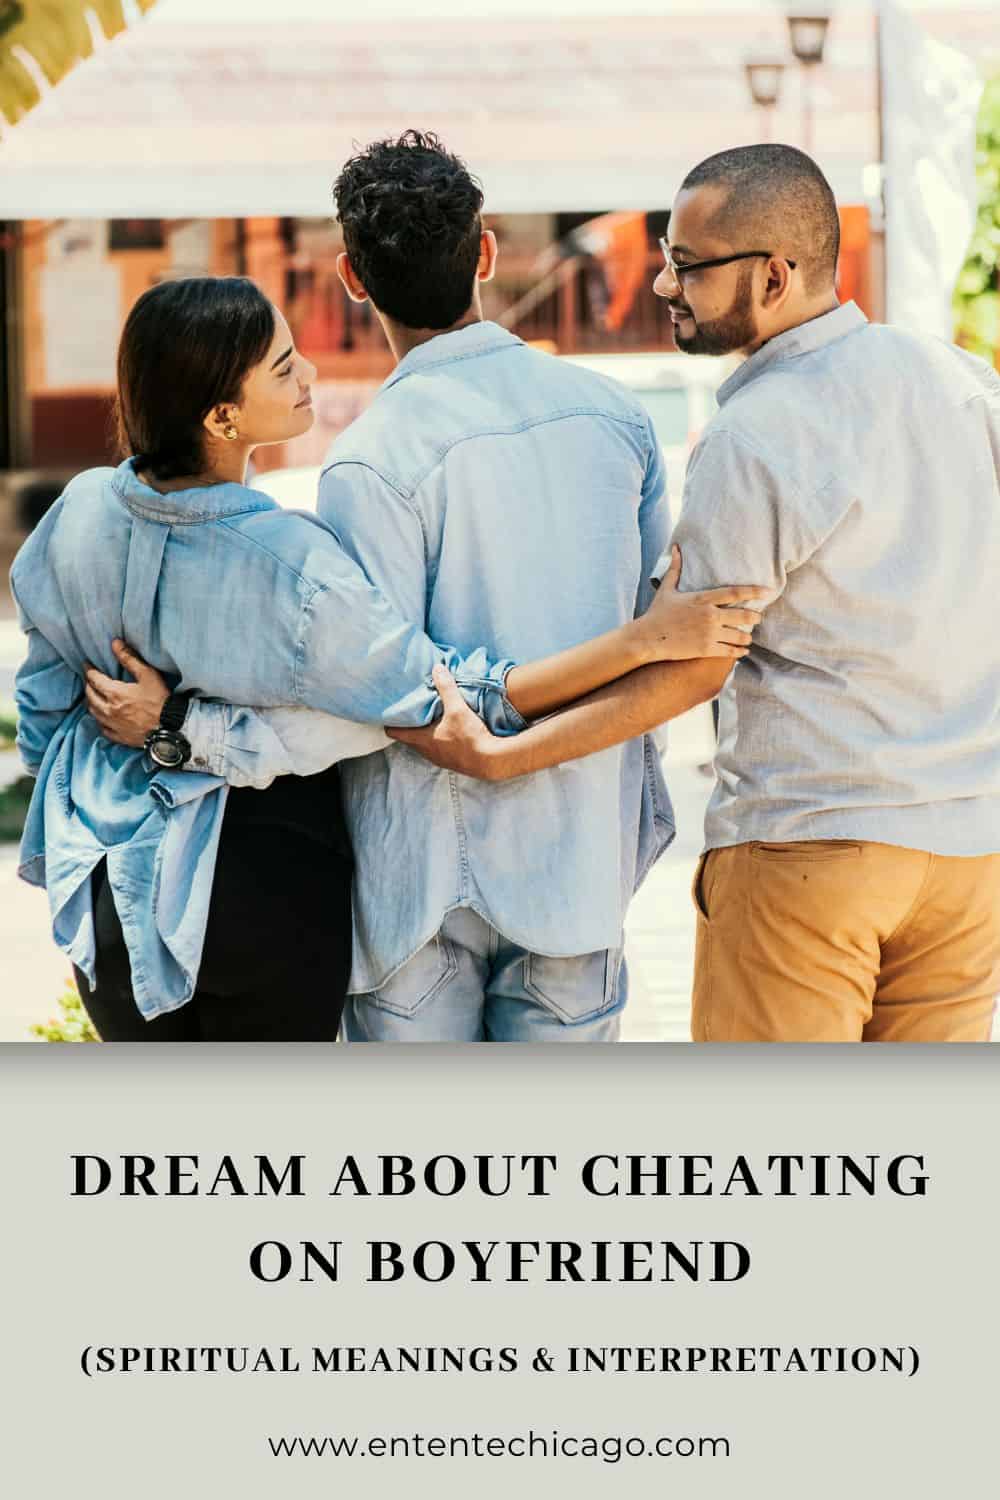 Dream of cheating on your partner